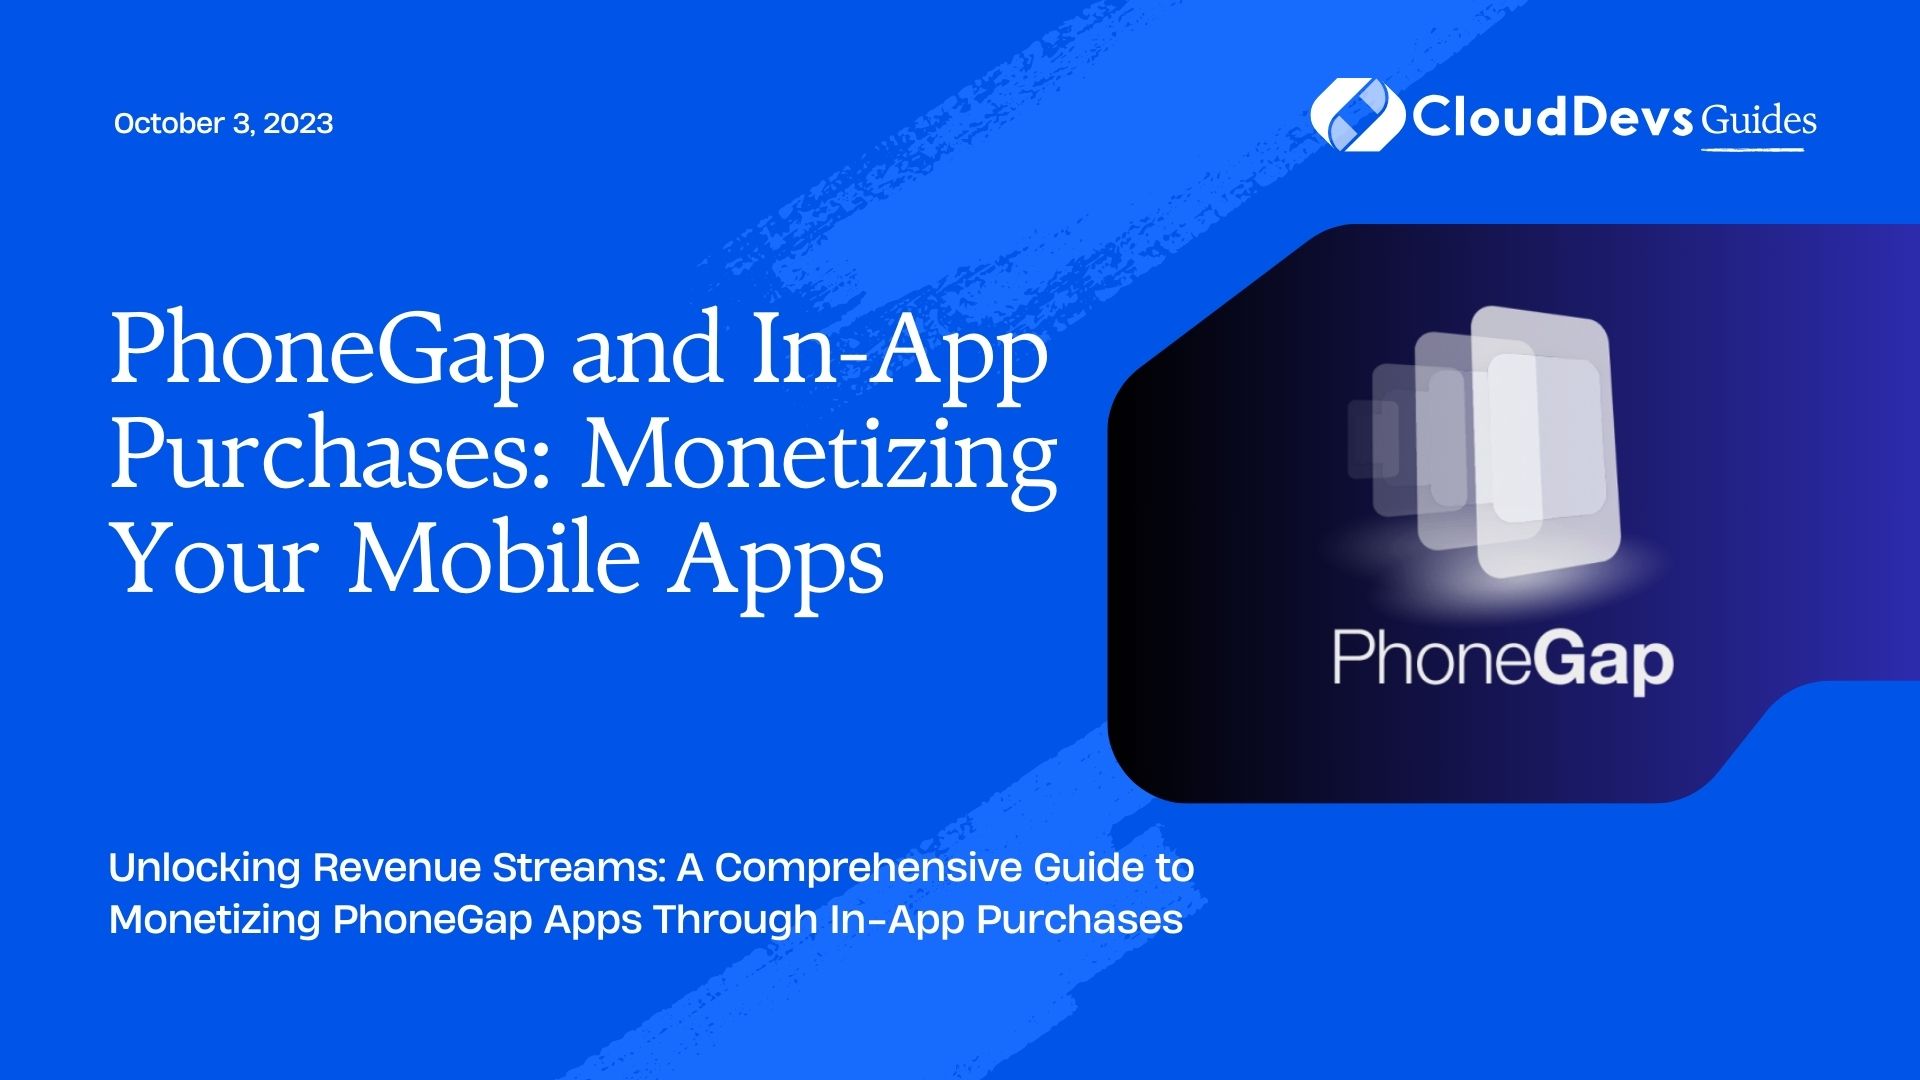 PhoneGap and In-App Purchases: Monetizing Your Mobile Apps